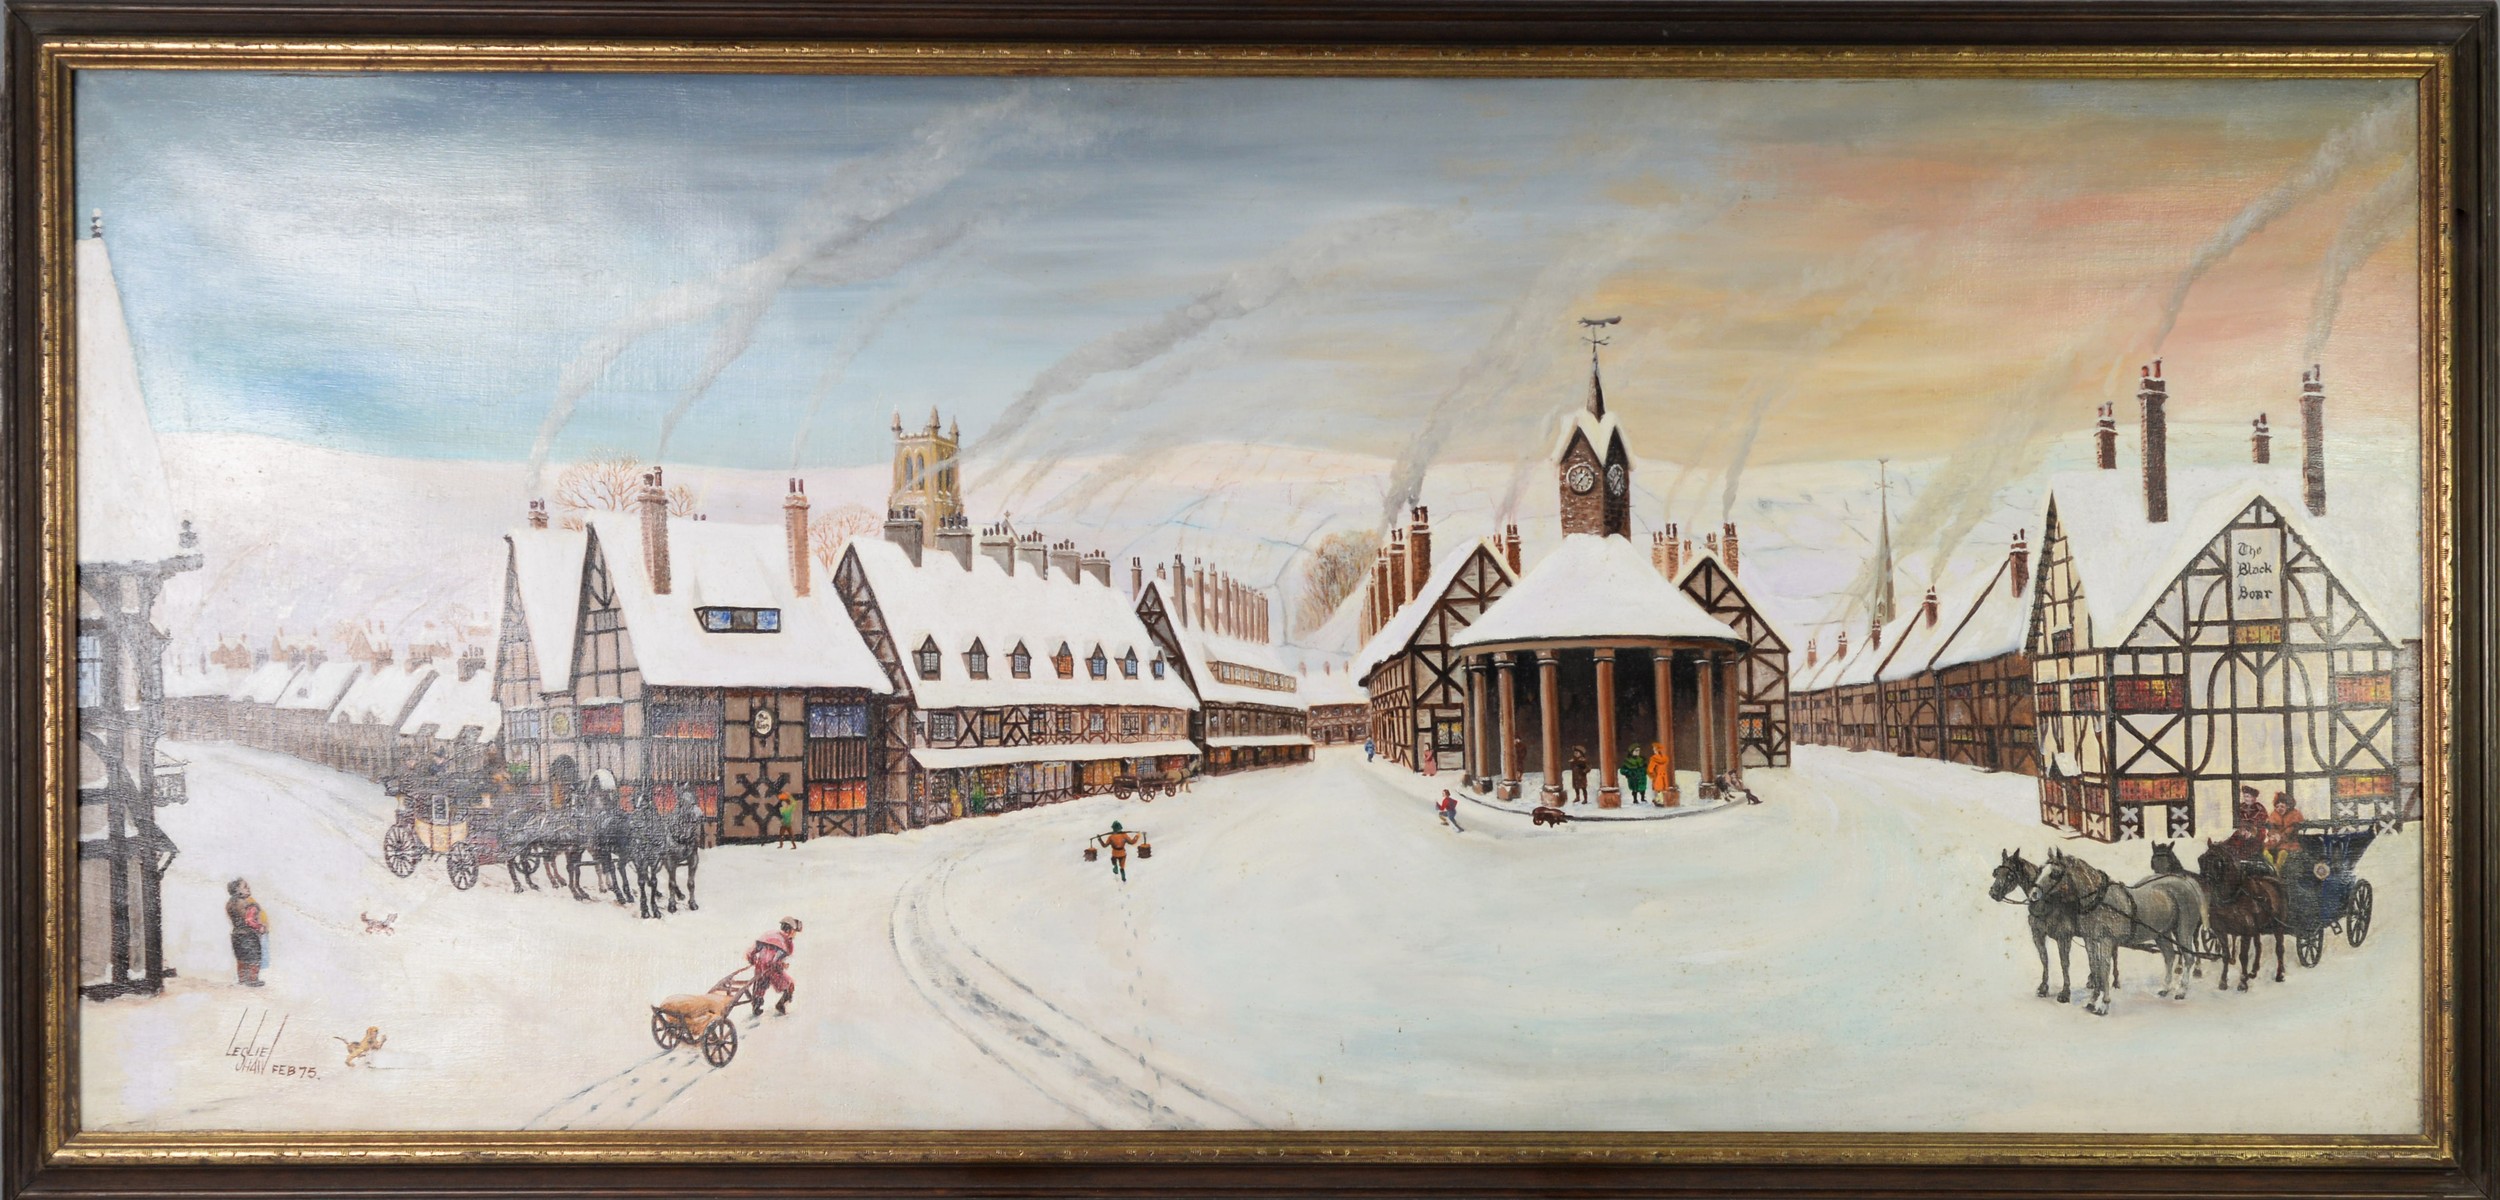 LESLIE SHAW (TWENTIETH CENTURY) OIL ON CANVAS Bygone winter village scene with horse drawn coaches - Image 2 of 2